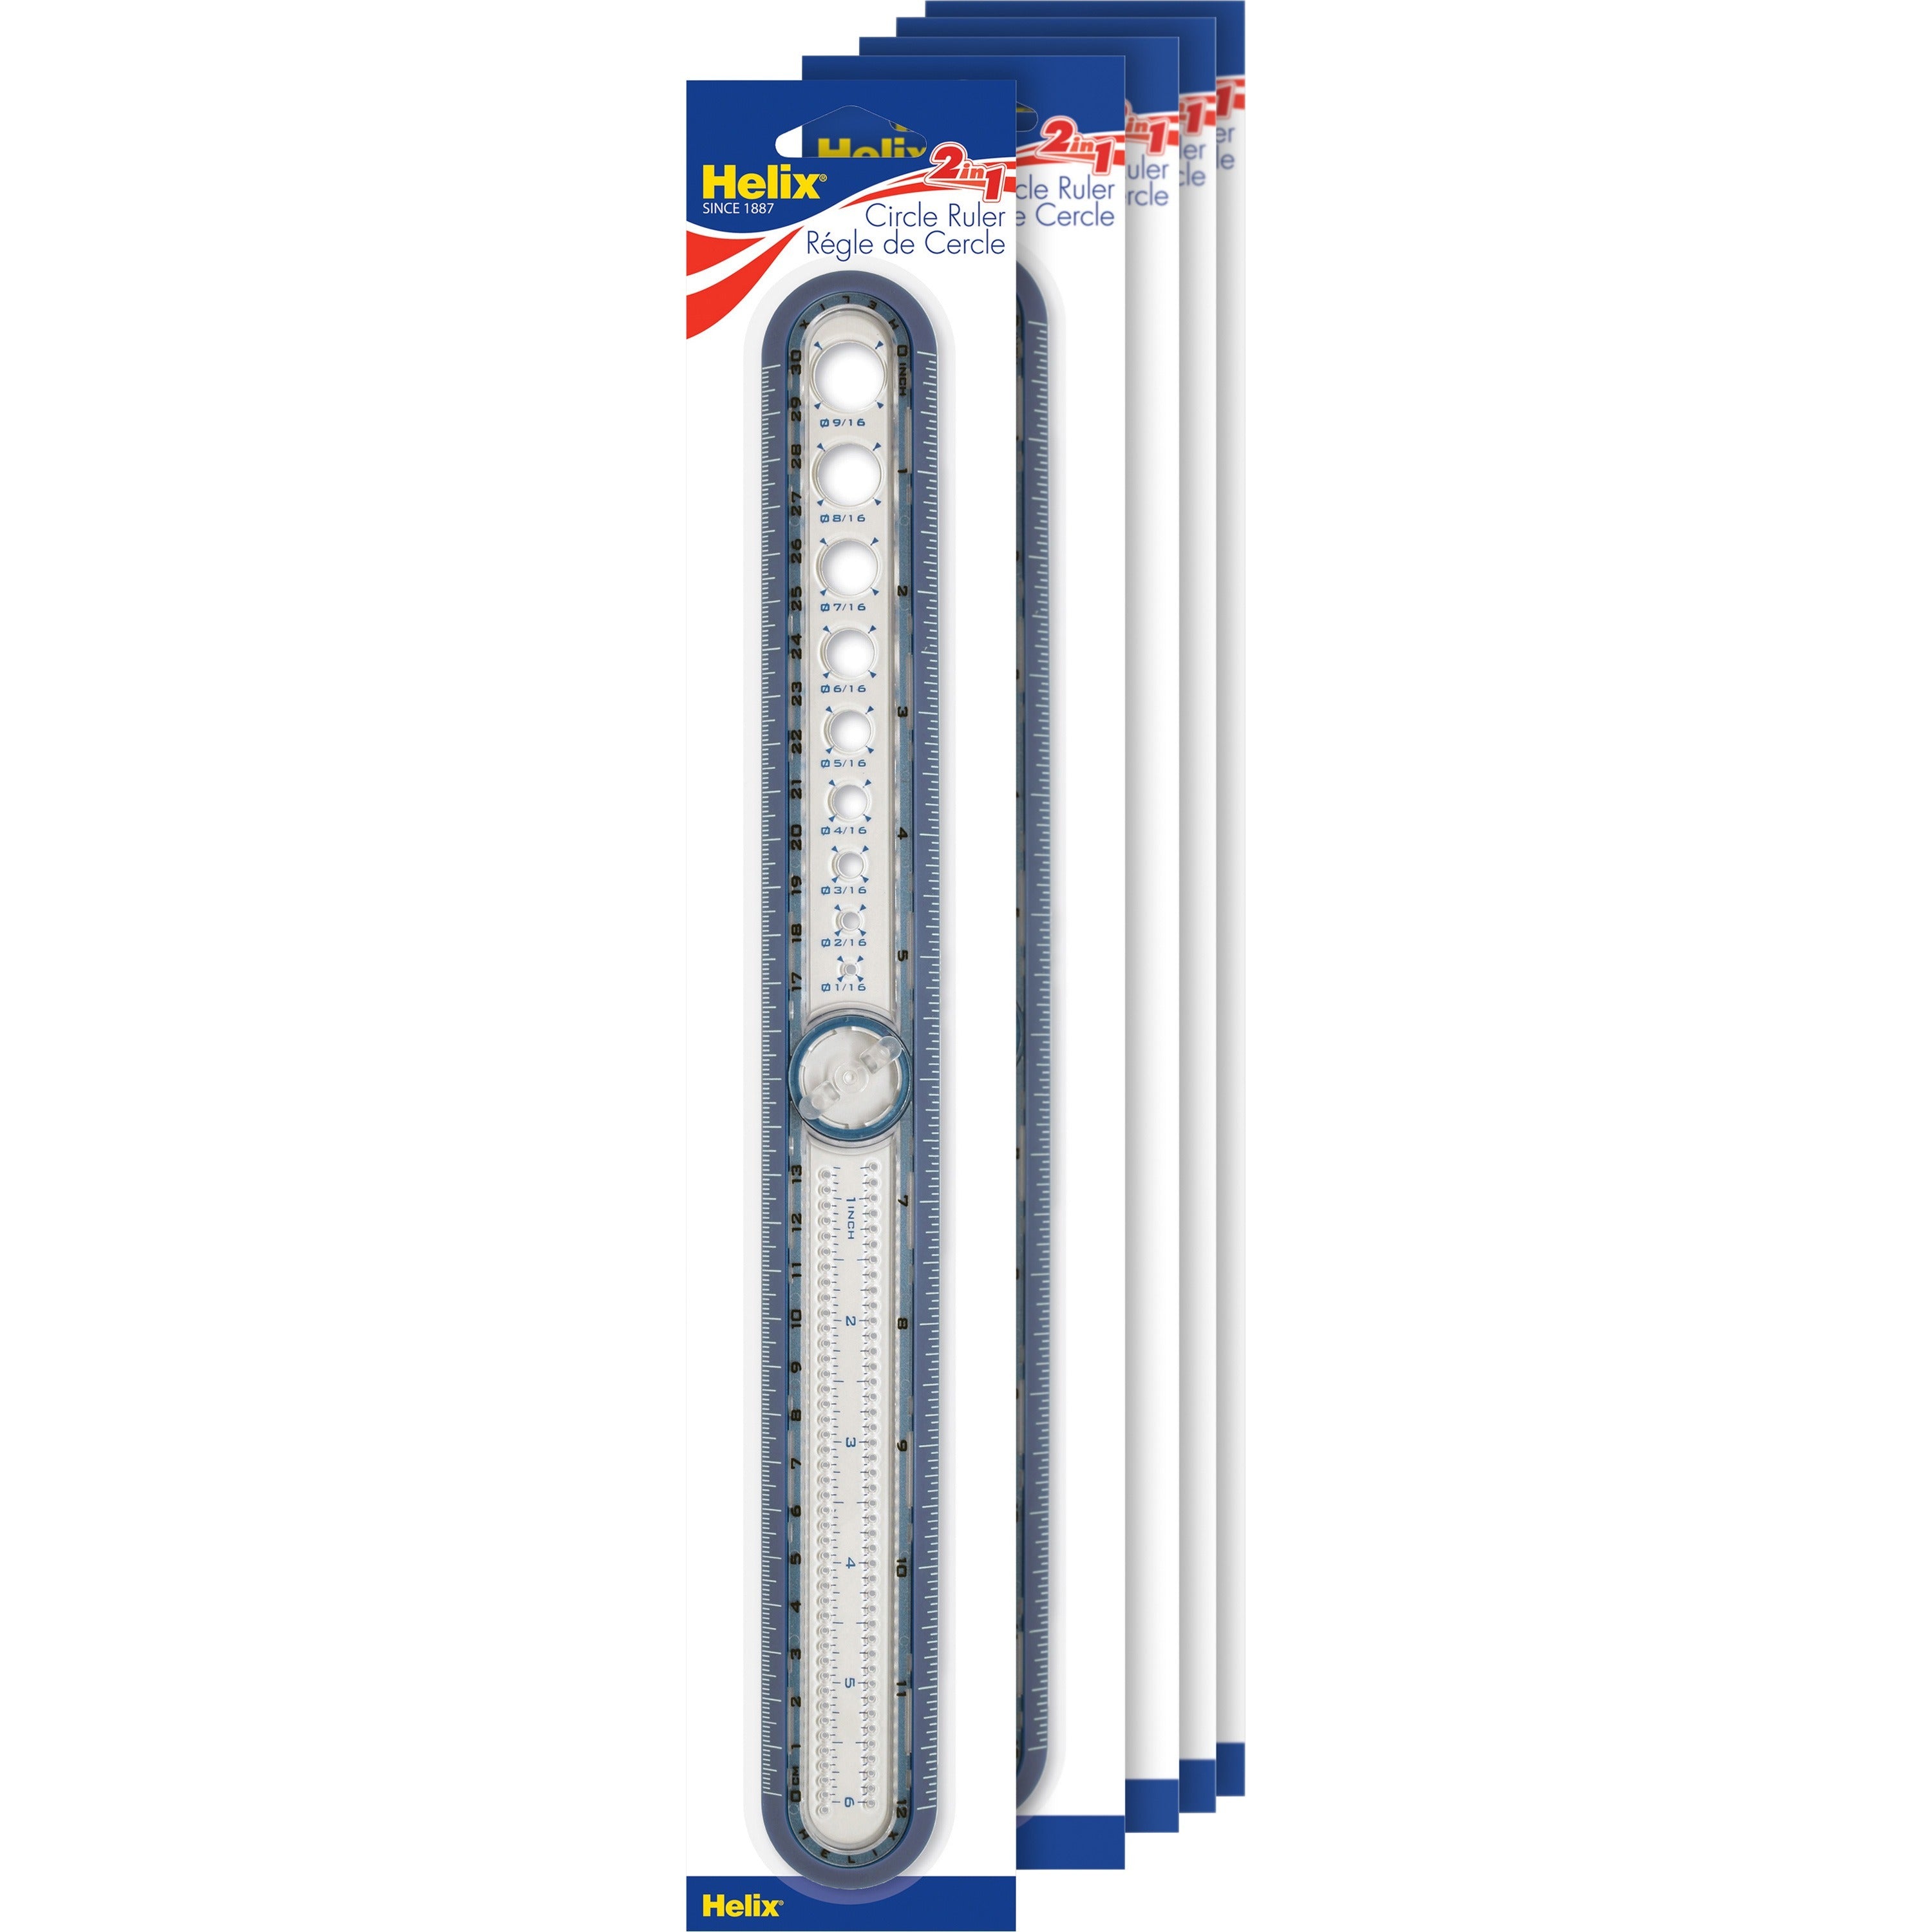 helix-ruler-30cm-12-graduations-imperial-metric-measuring-system-plastic-5-box-assorted_hlx36001 - 1